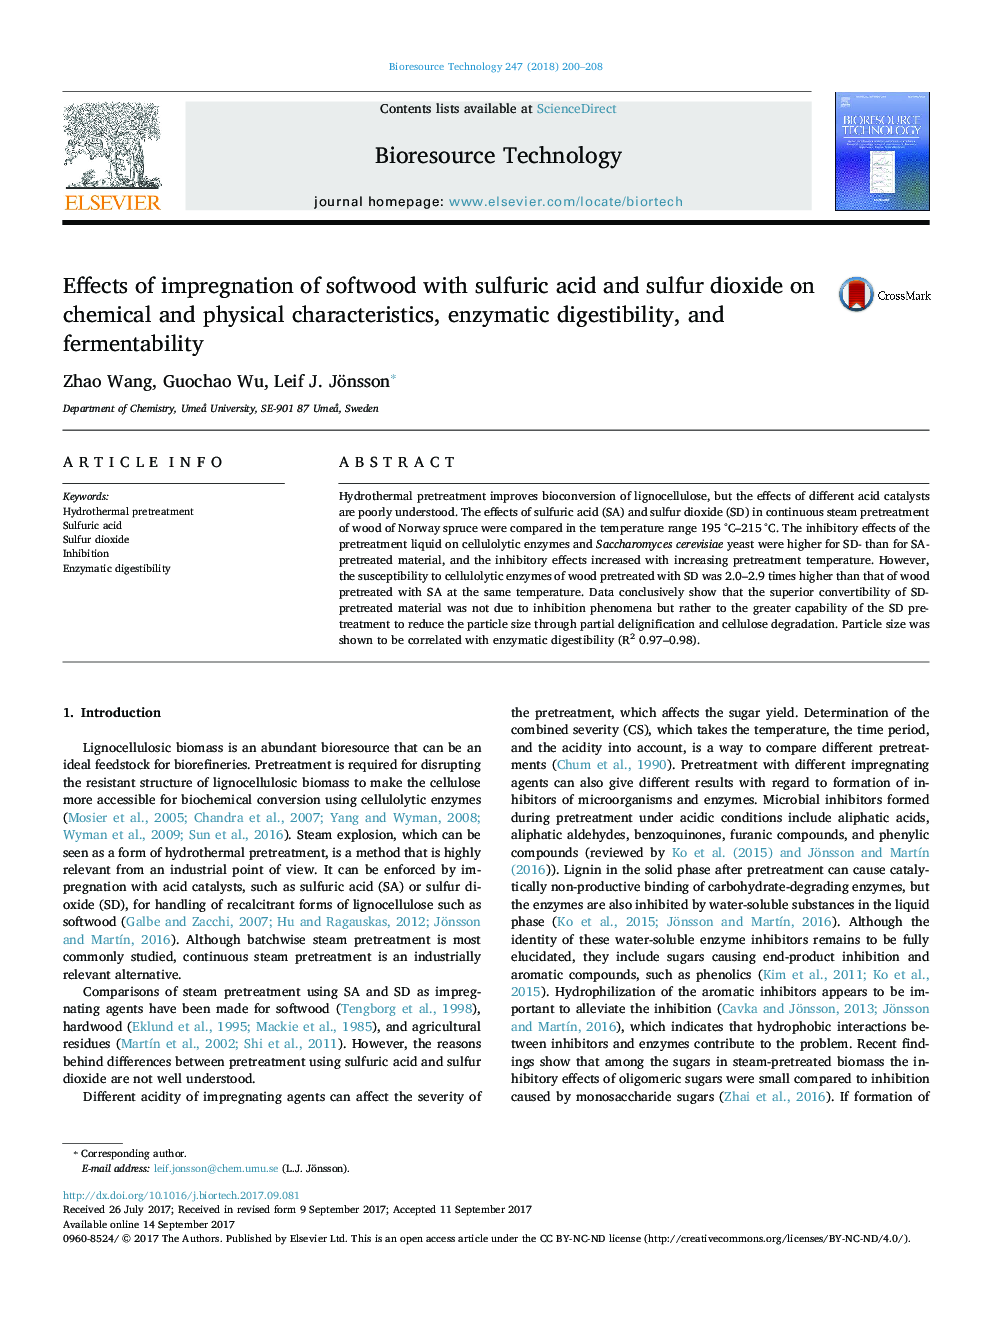 Effects of impregnation of softwood with sulfuric acid and sulfur dioxide on chemical and physical characteristics, enzymatic digestibility, and fermentability